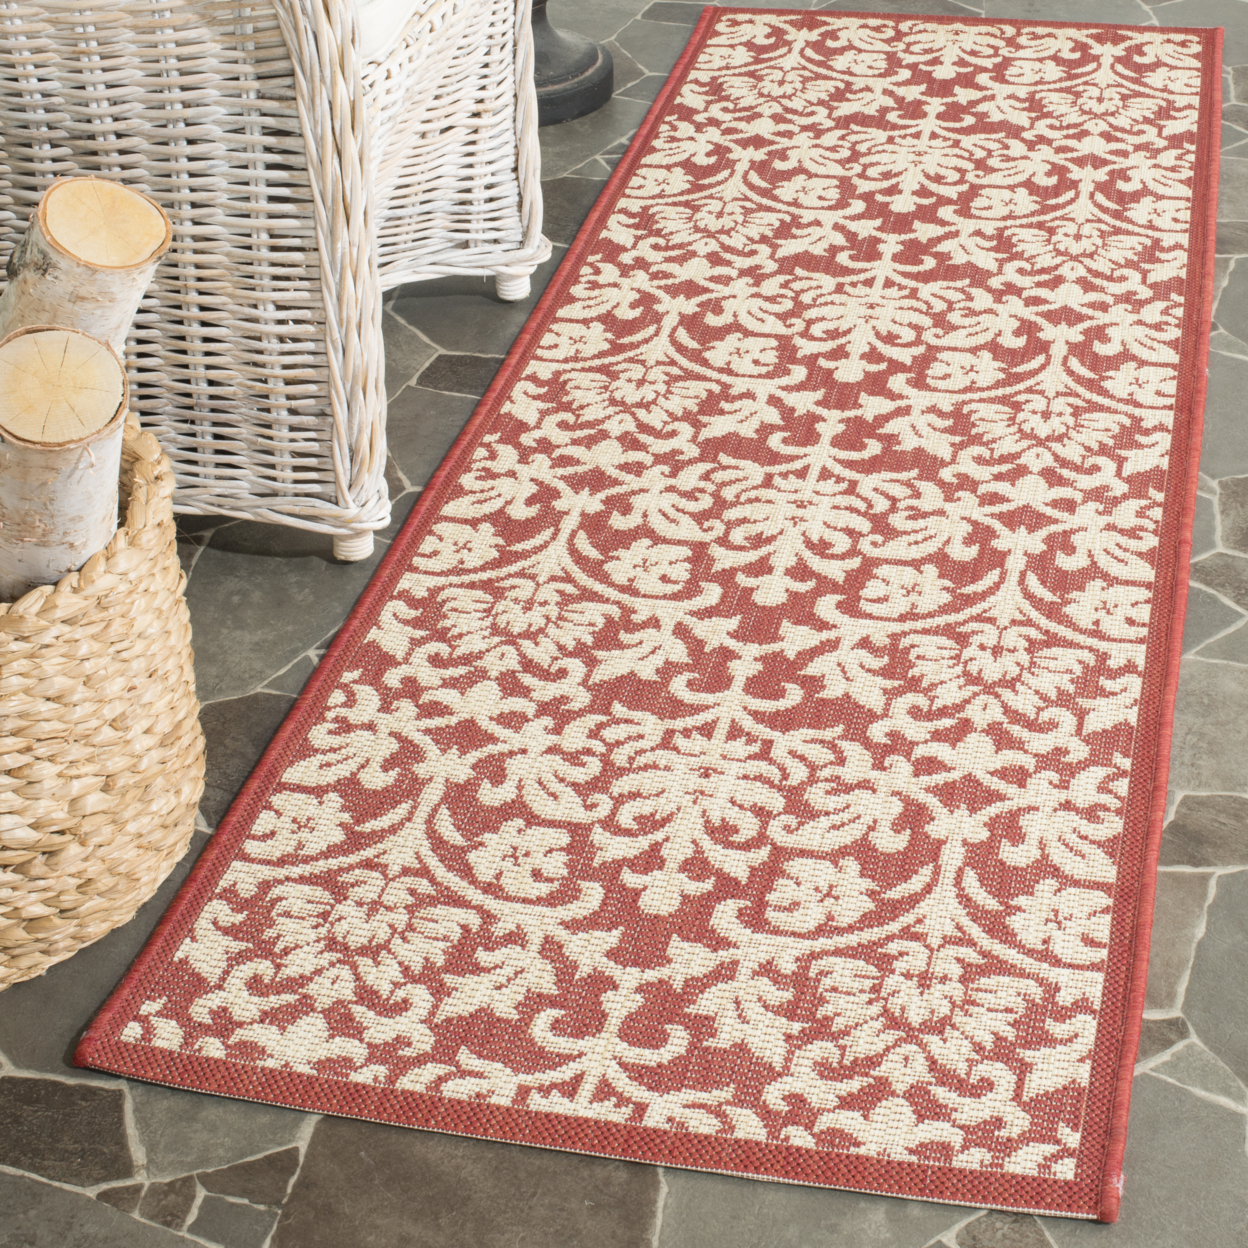 SAFAVIEH Courtyard Yvette Floral Indoor/Outdoor Area Rug, 5'3" x 7'7", Red/Natural - image 3 of 10